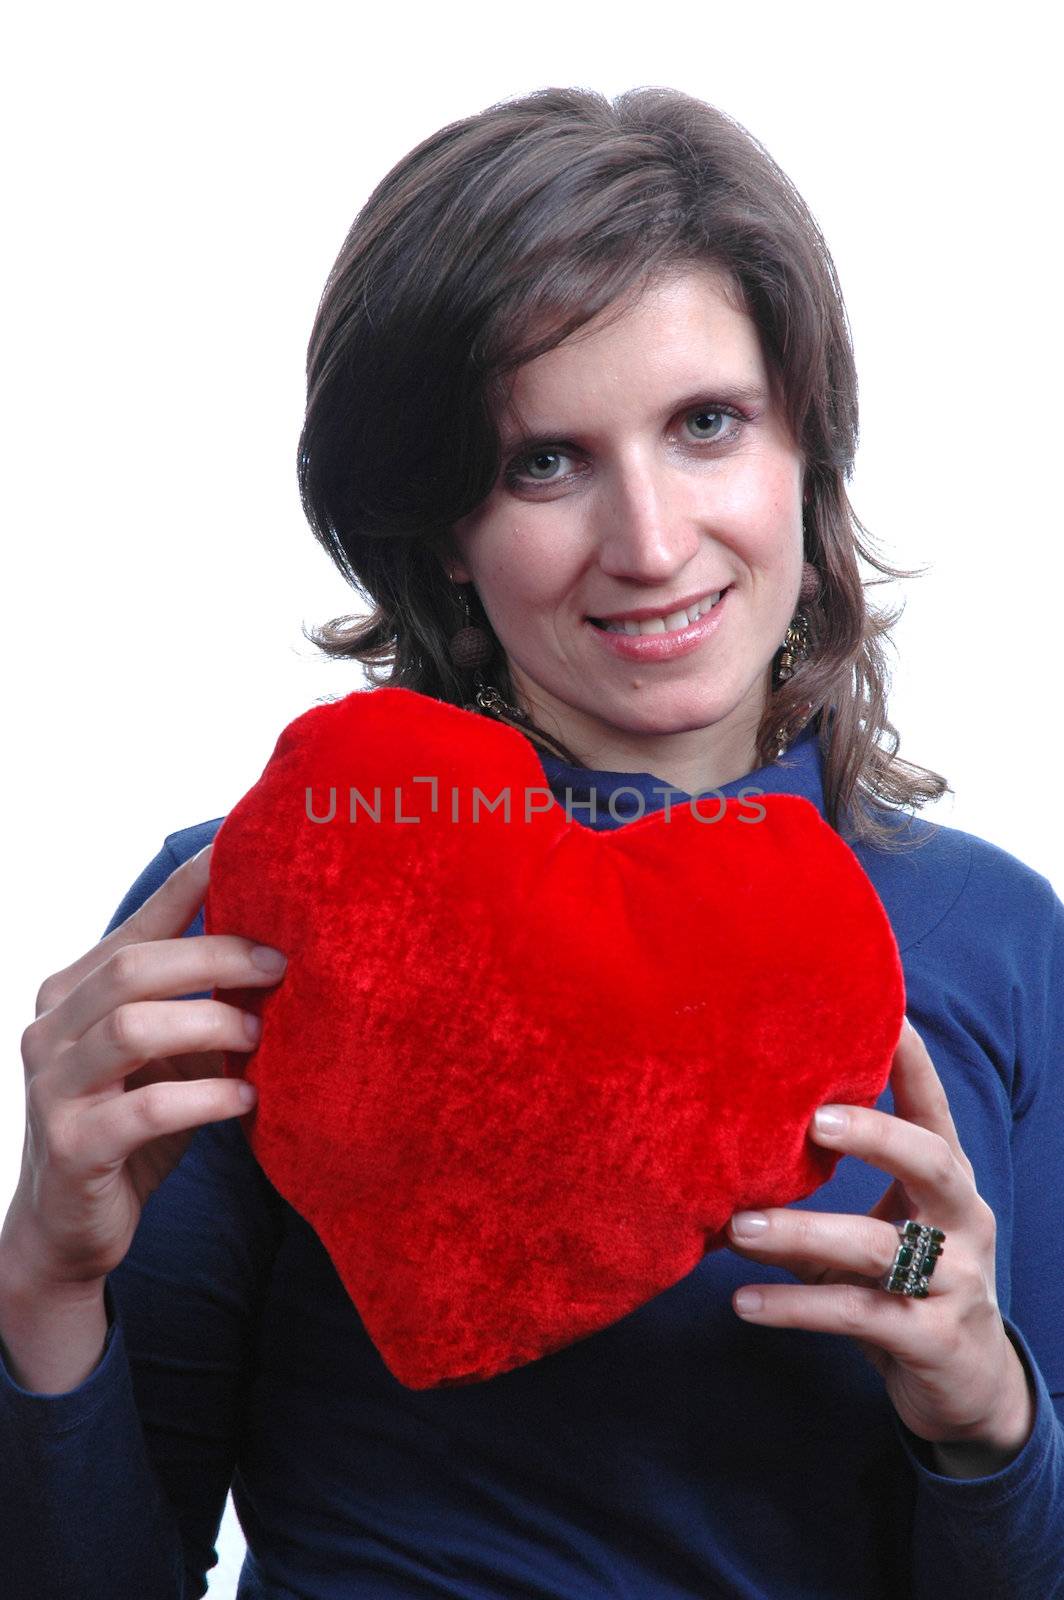 pretty young woman holding a Valentines heart

